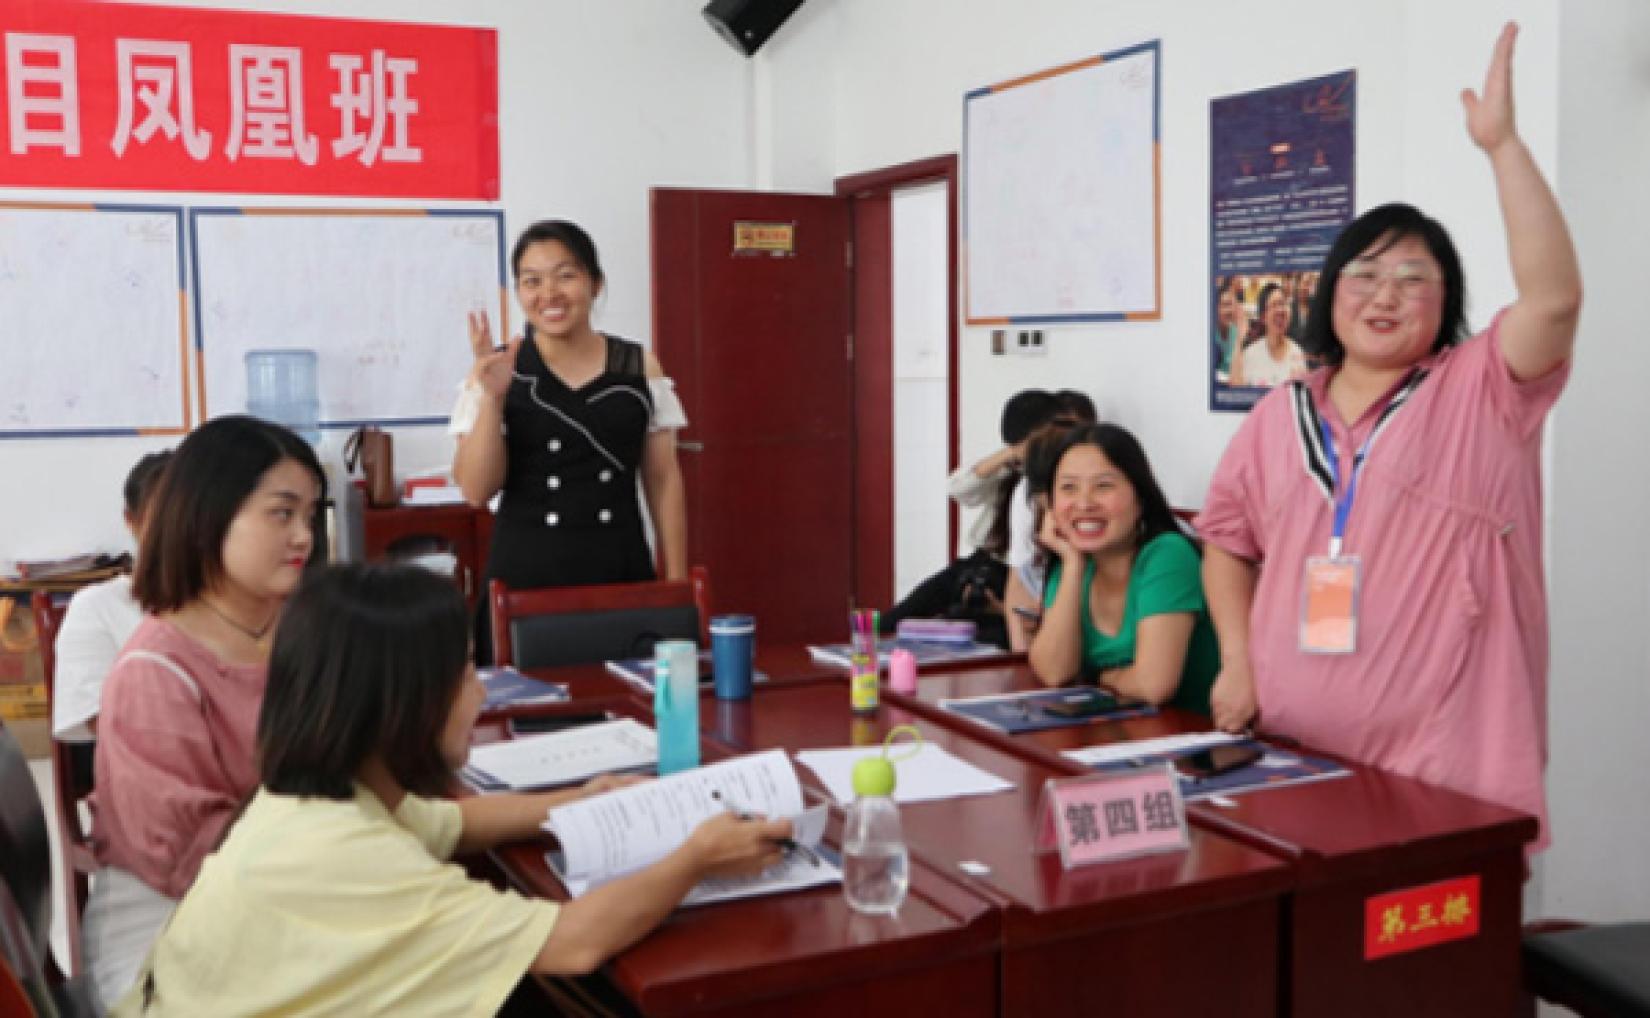 Ma Qinyan (right) speaks at a training session in Fenghuang as part of the Women Up initiative.